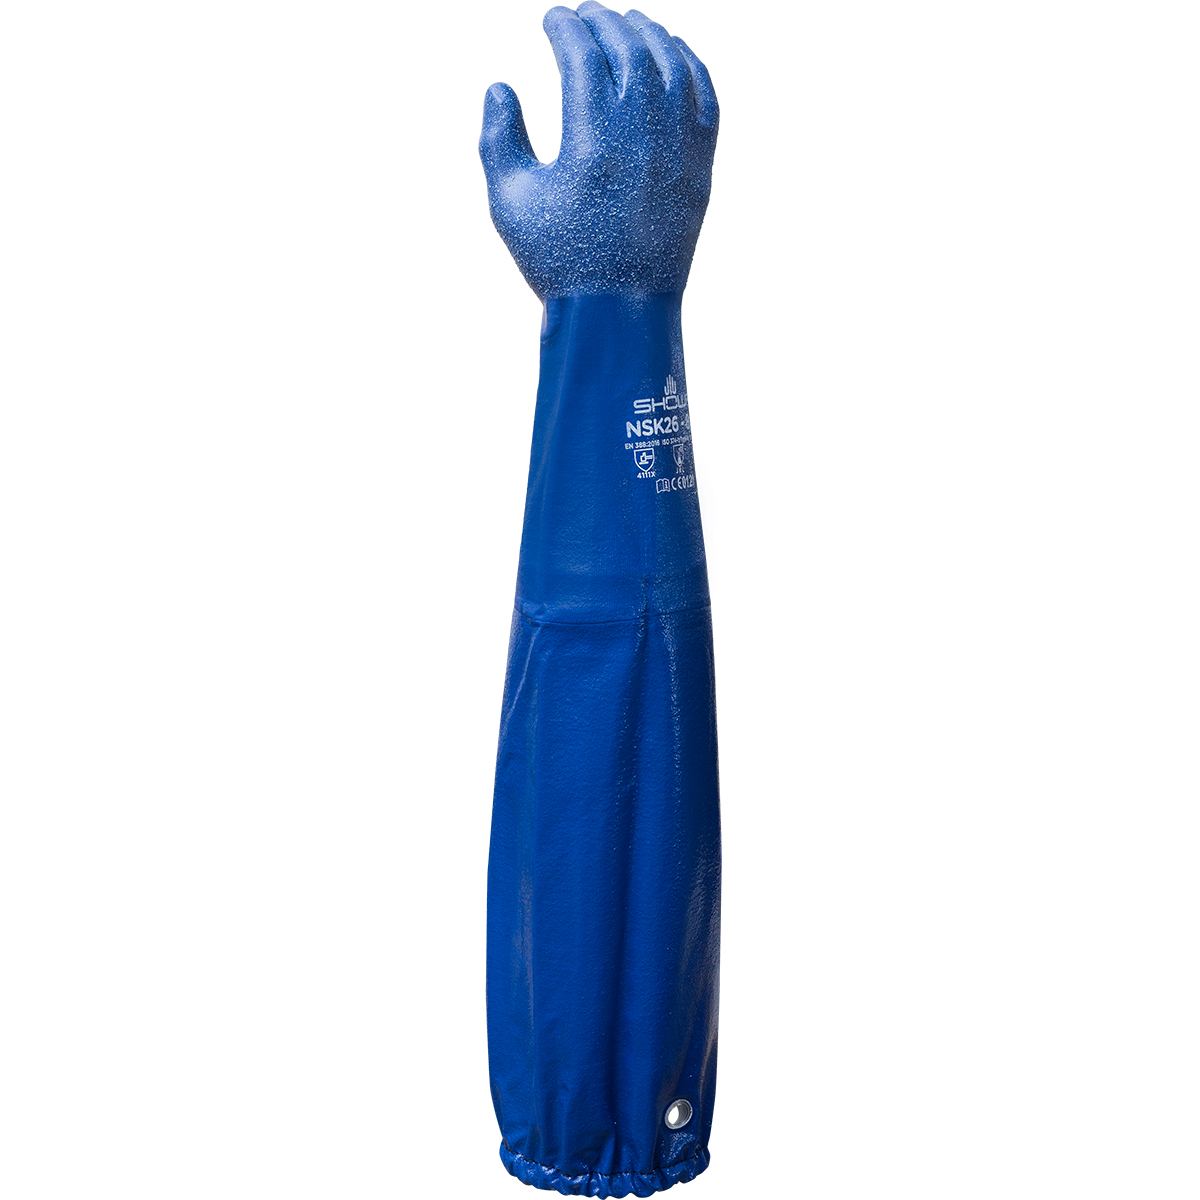 Chemical resistant nitrile, fully coated 26" extended gauntlet, royal blue, rough finish, cotton interlock liner, medium